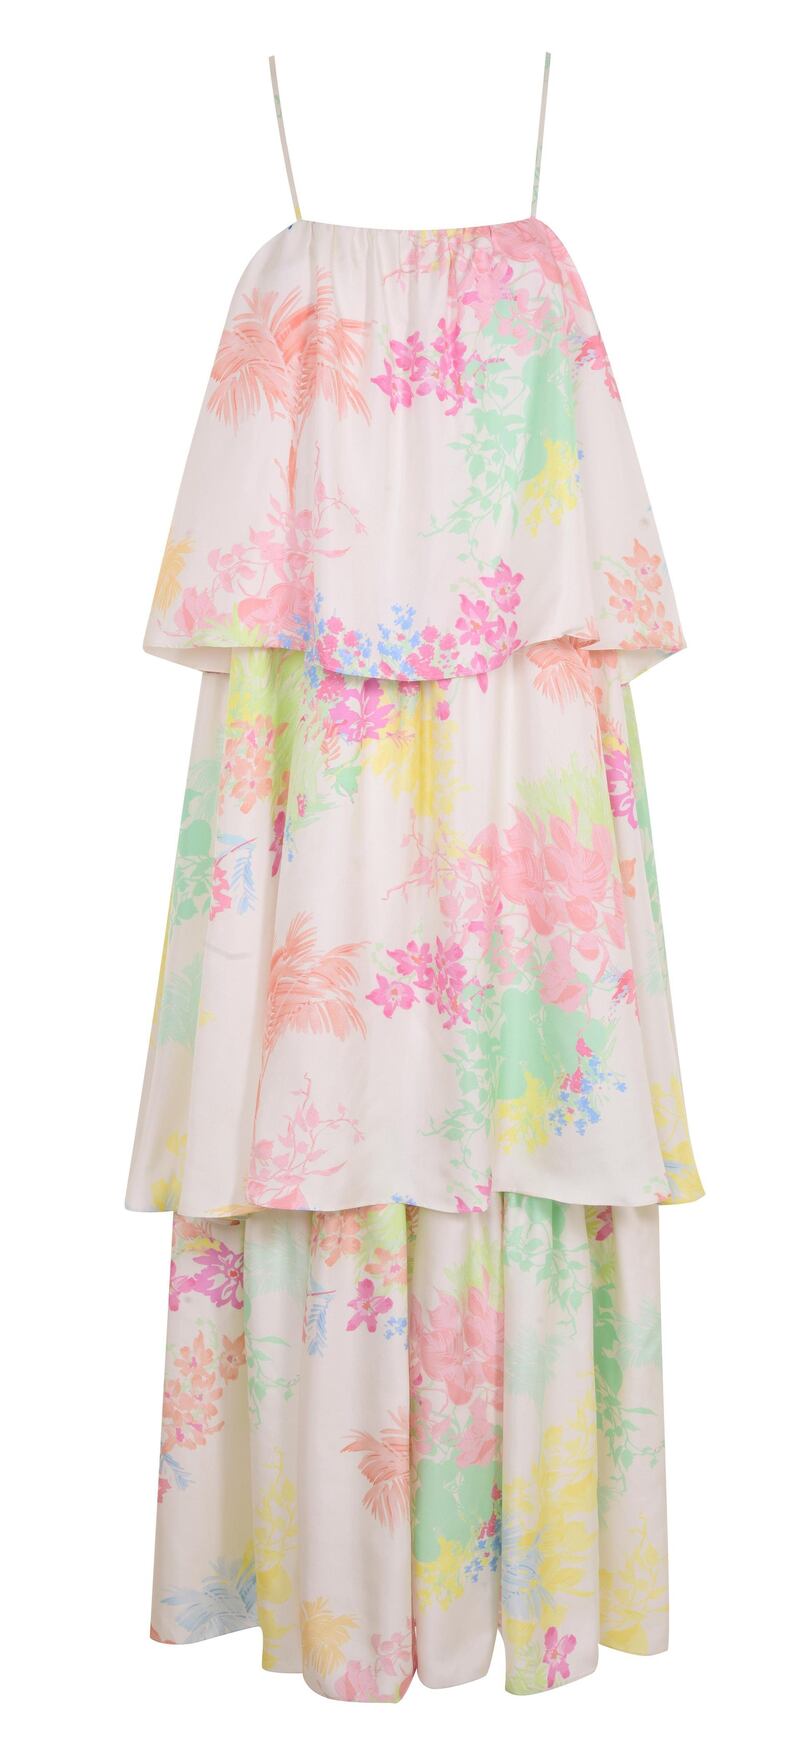 Pastel tiered dress, Dh206, Dorothy Perkins